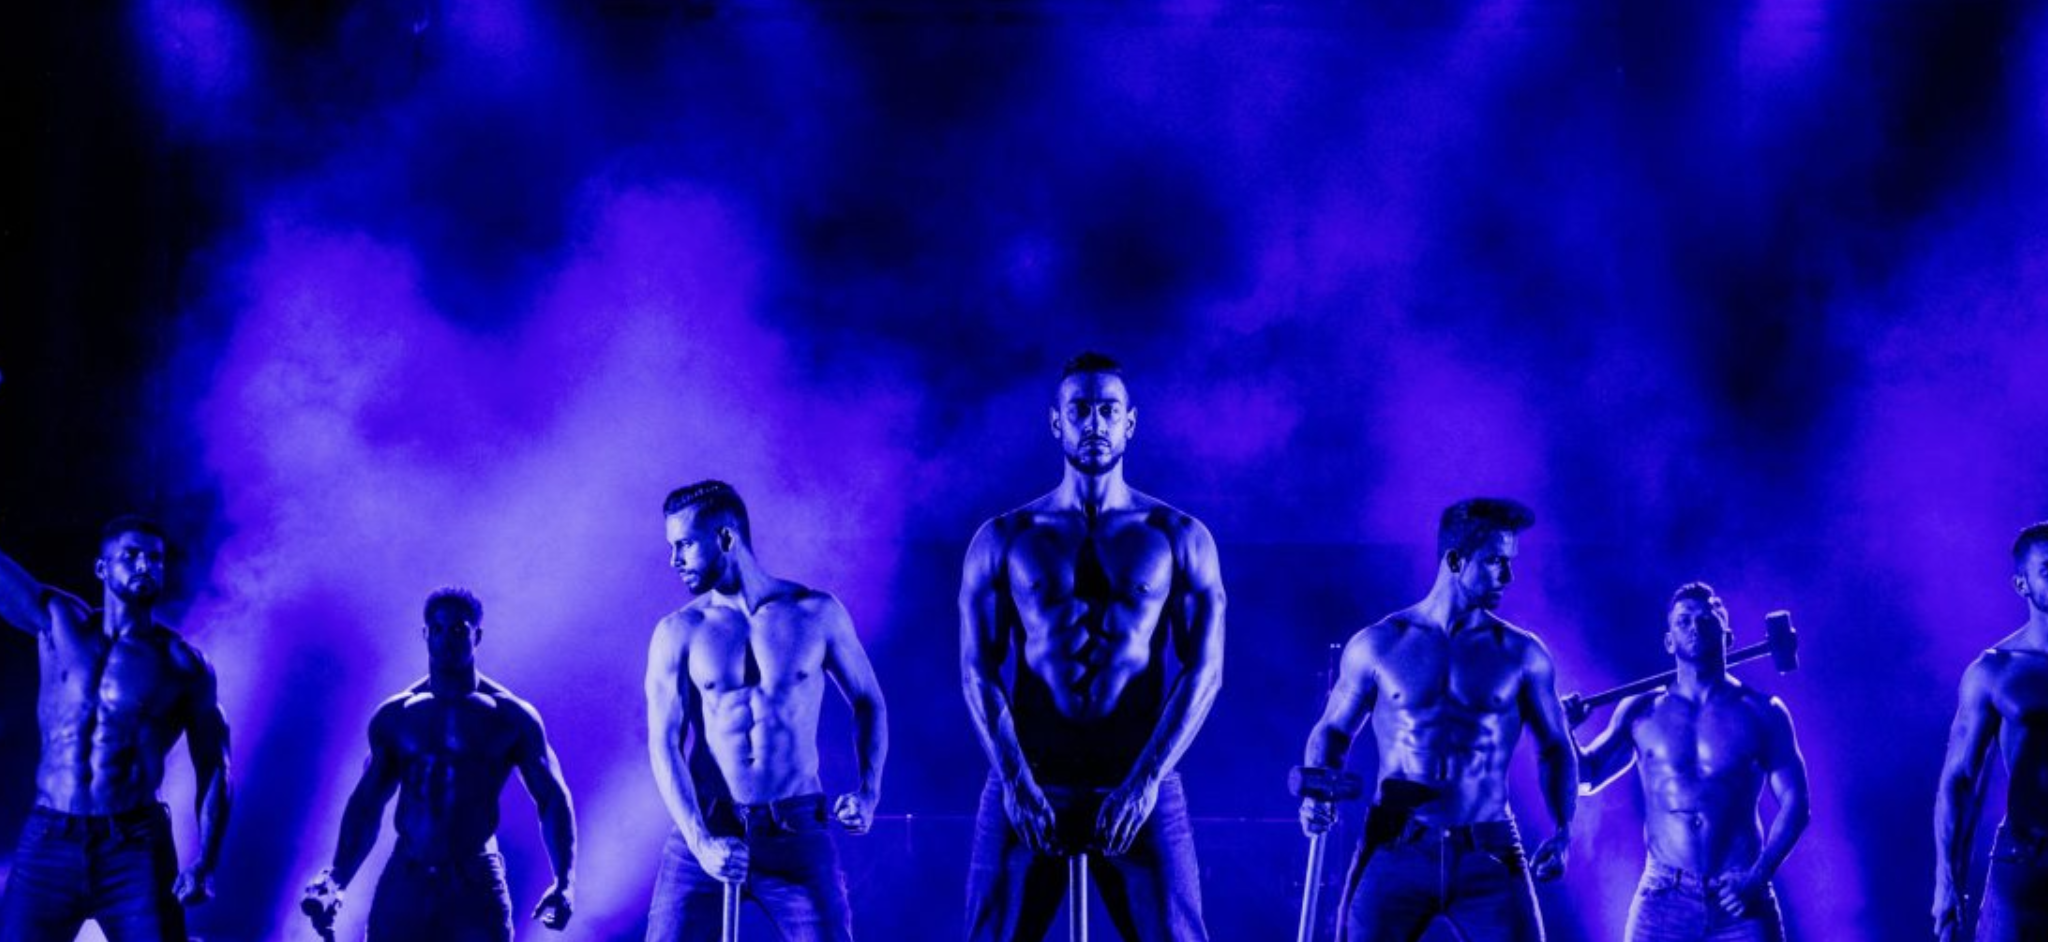 THE CHIPPENDALES am 8. November 2022 @ Tips Arena Linz.